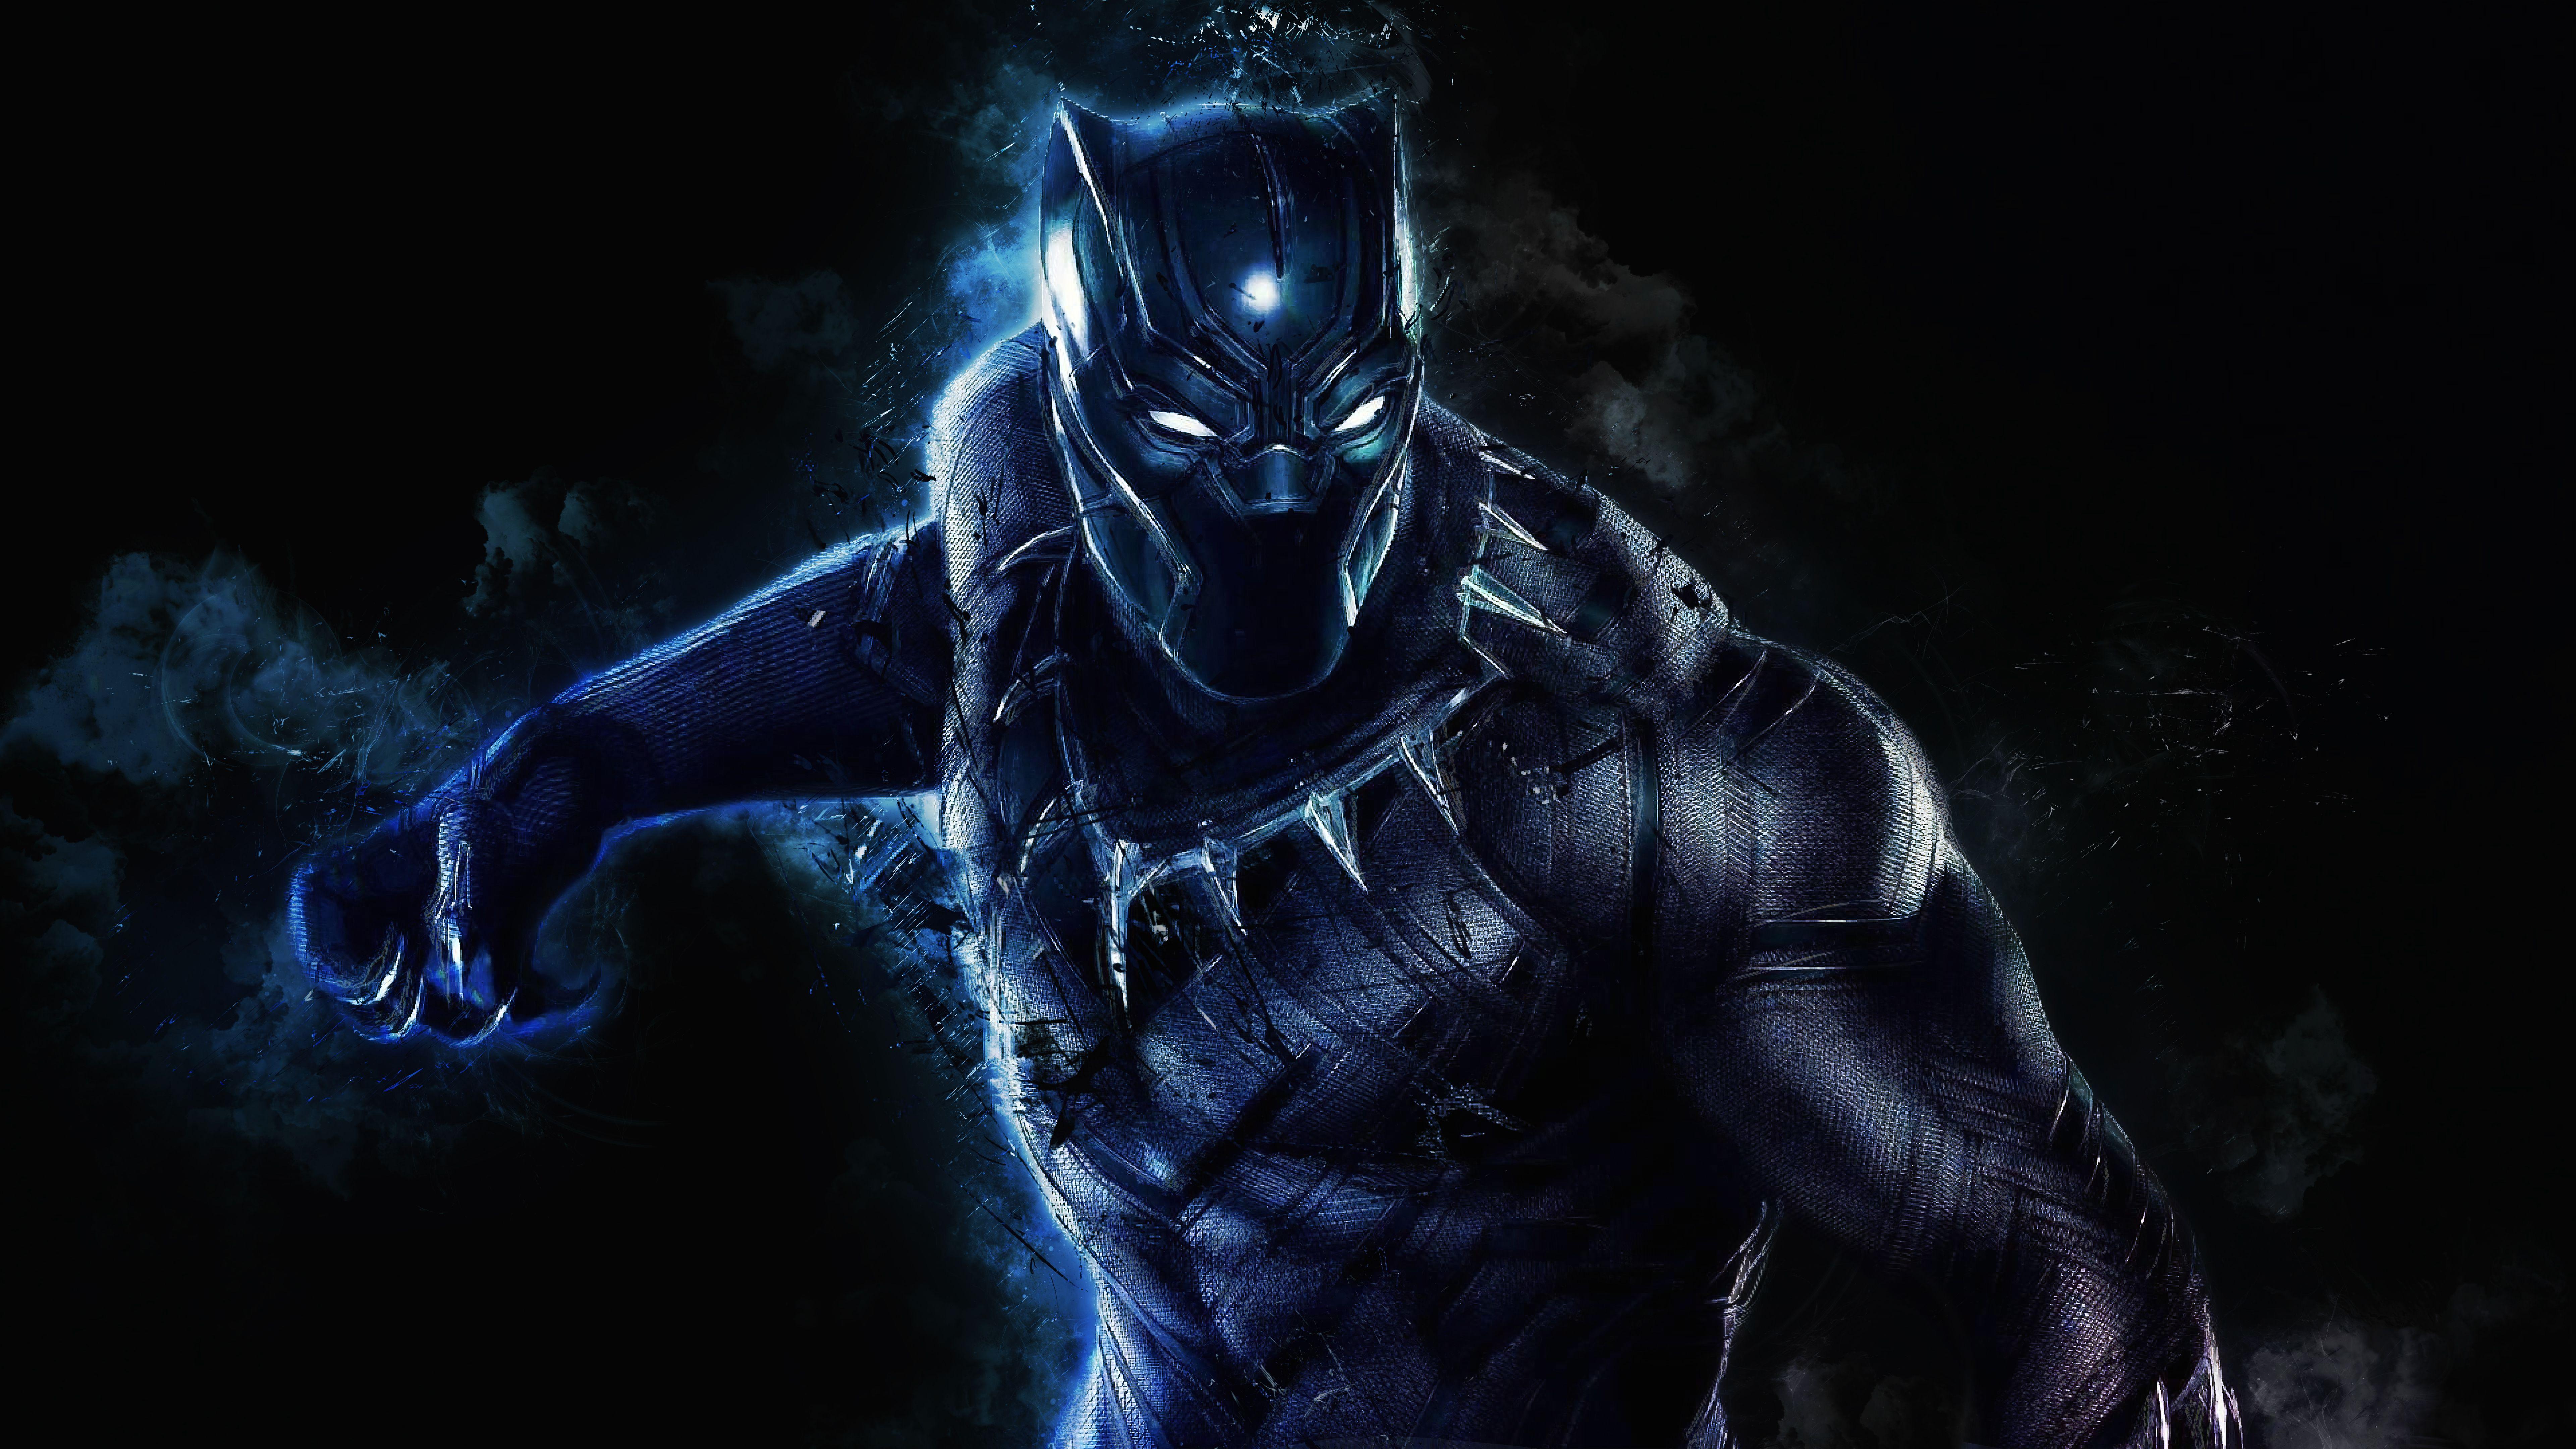 7680 x 4320 · jpeg - Cool Black Panther Wallpapers - Top Free Cool Black Panther Backgrounds ...